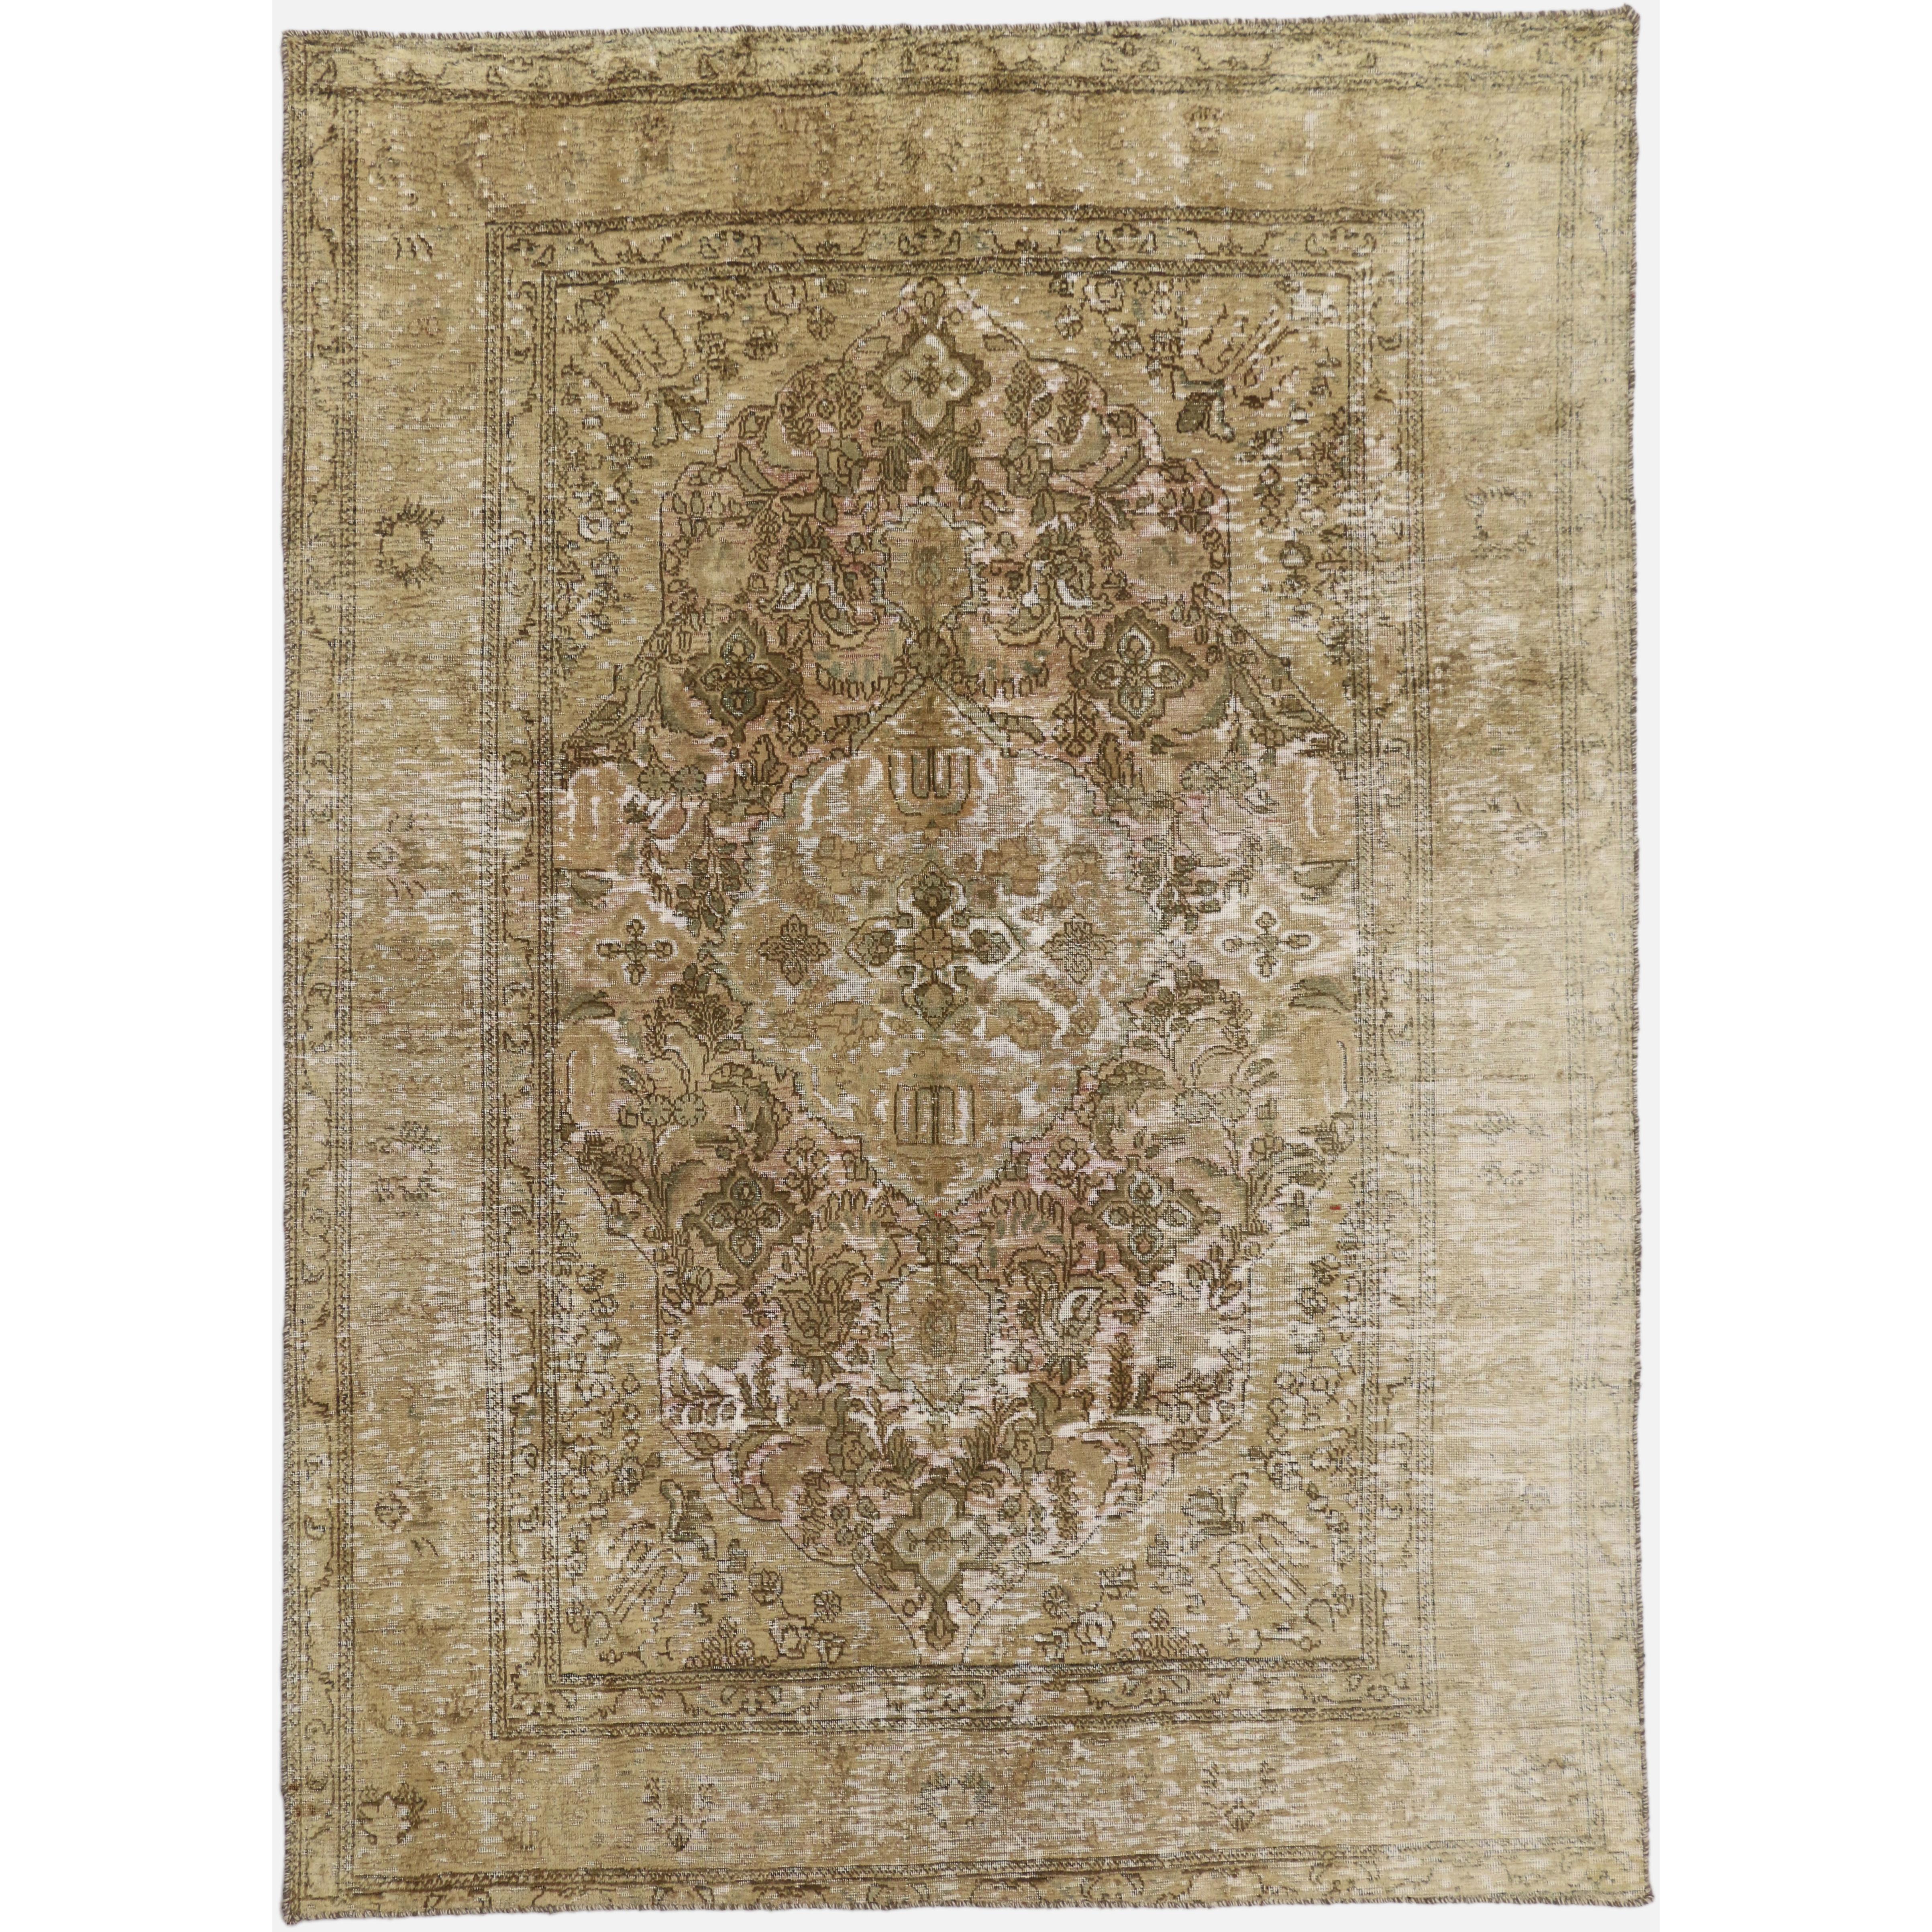 Distressed Vintage Persian Overdyed Rug with Rustic French Industrial Style For Sale